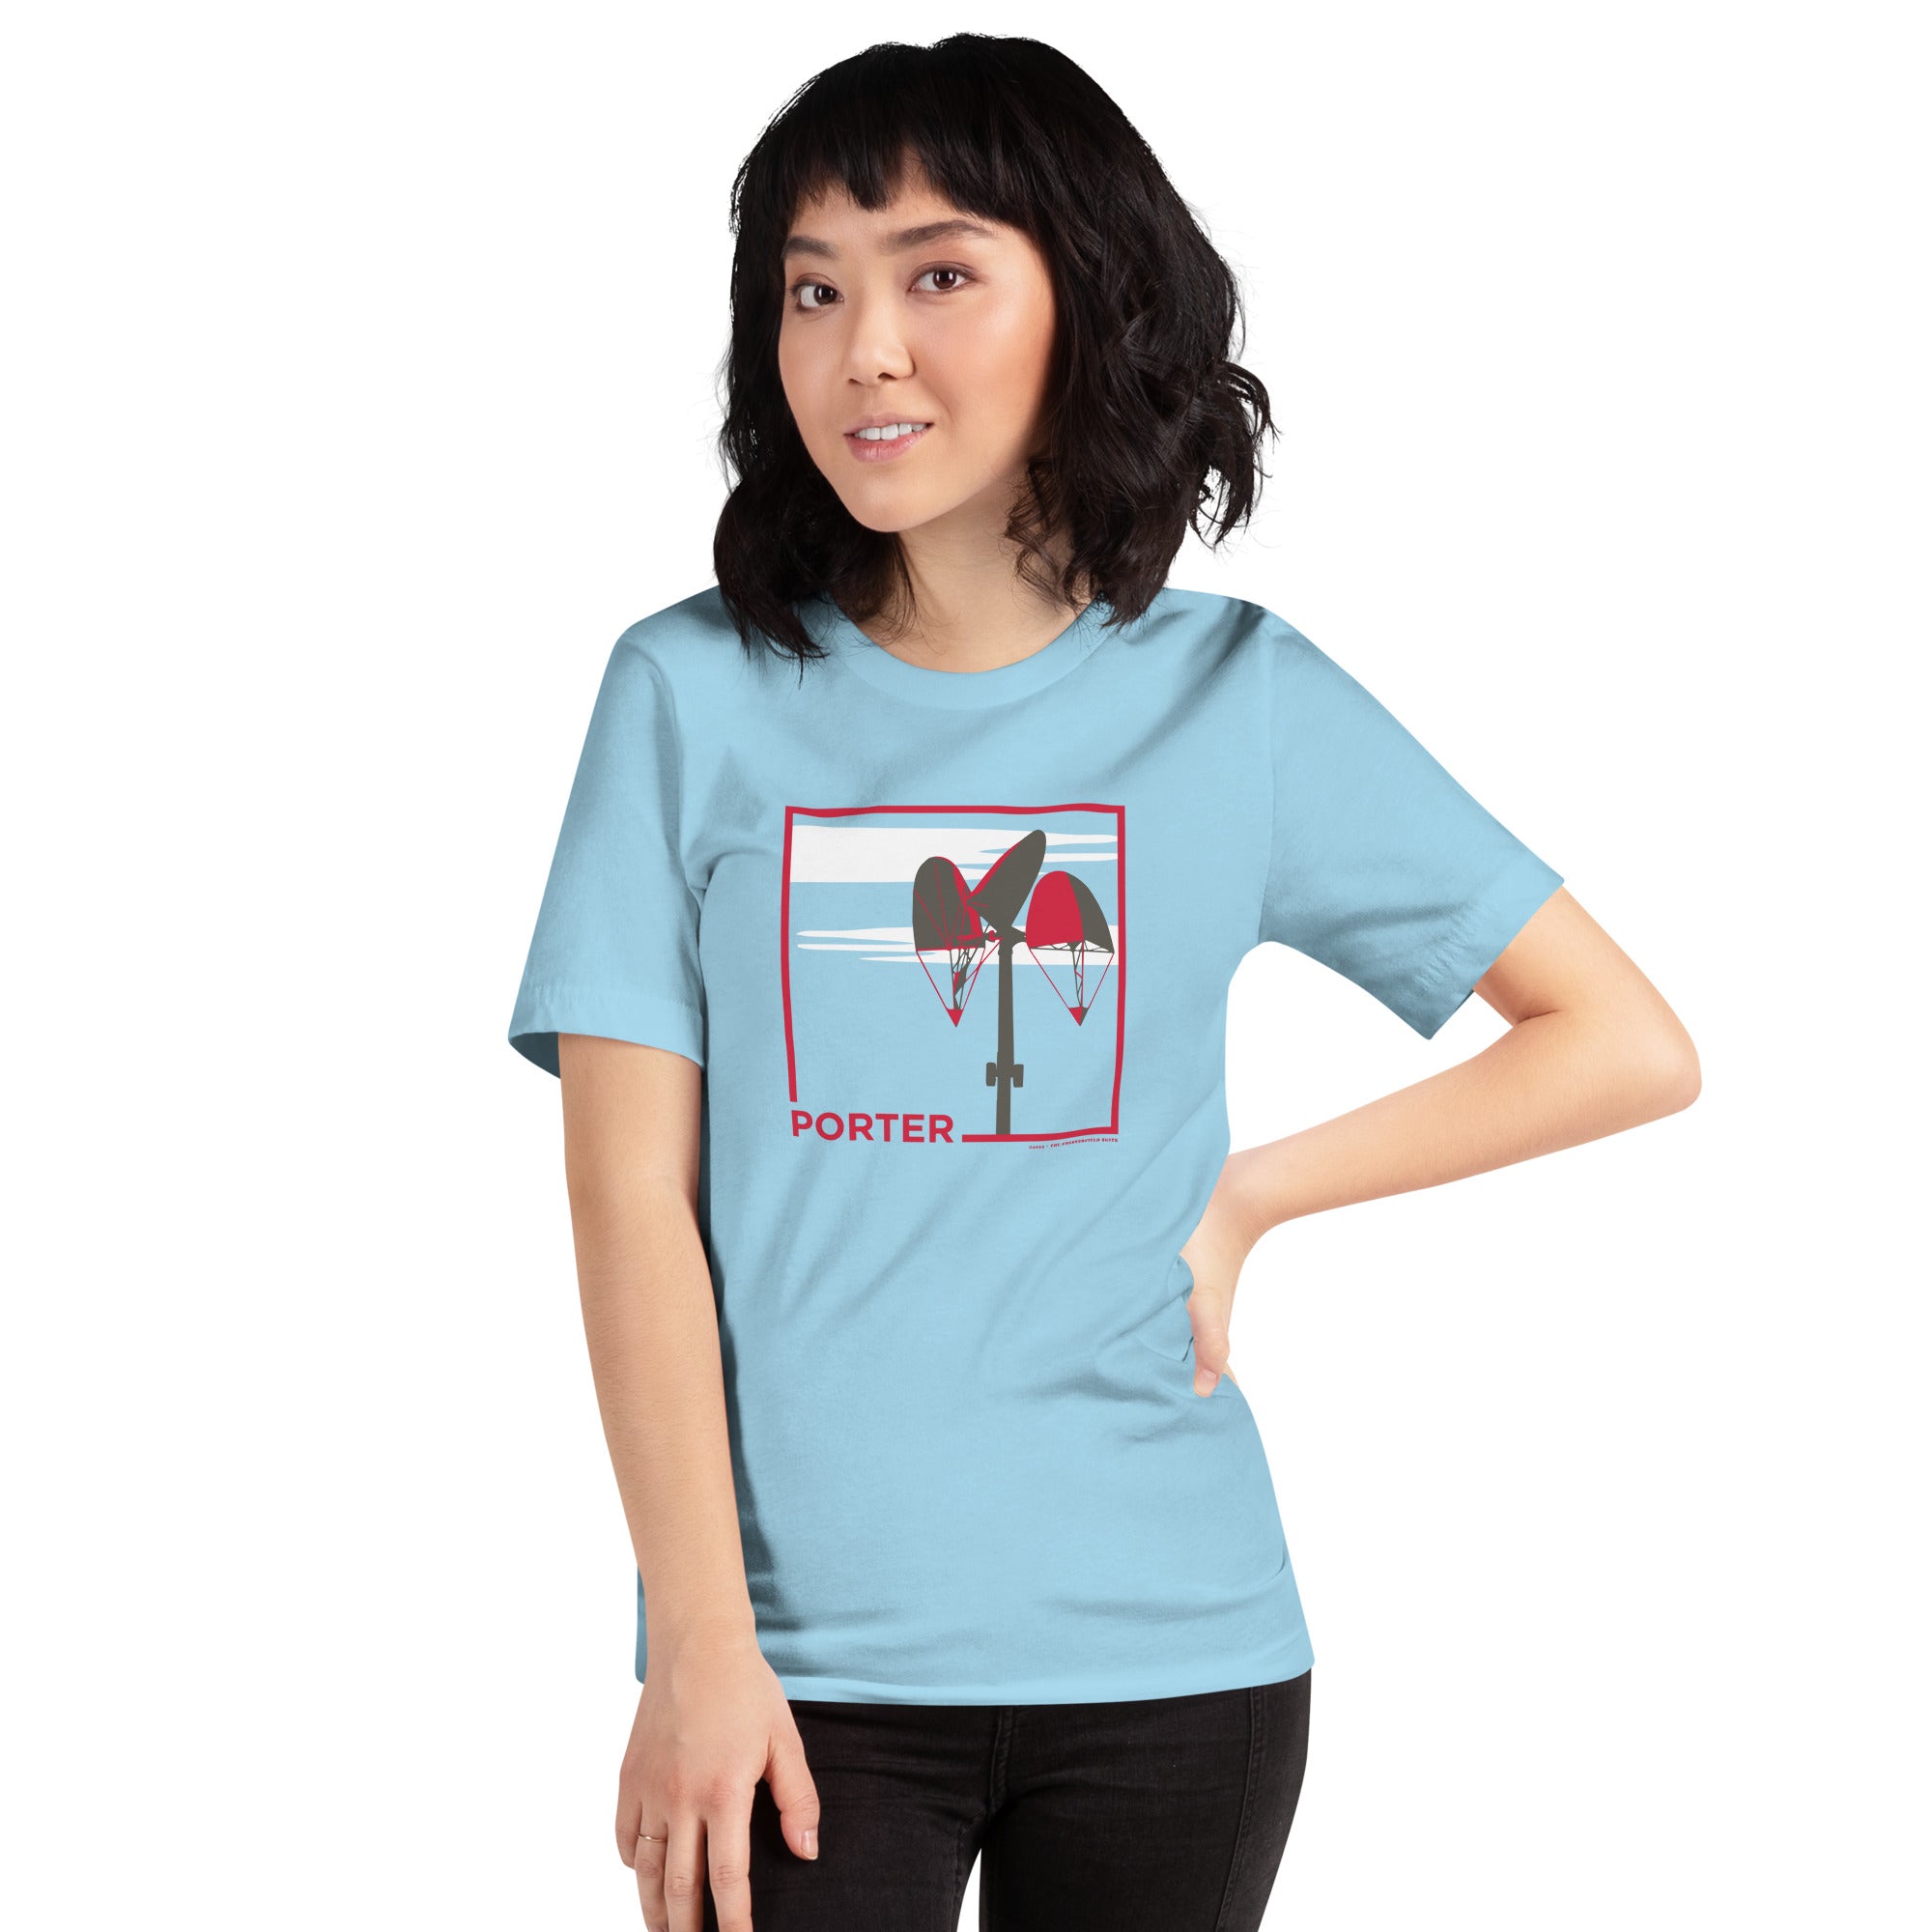 woman wearing light blue unisex t-shirt with the word porter and a square in red, featuring it's mobile and a white cloud